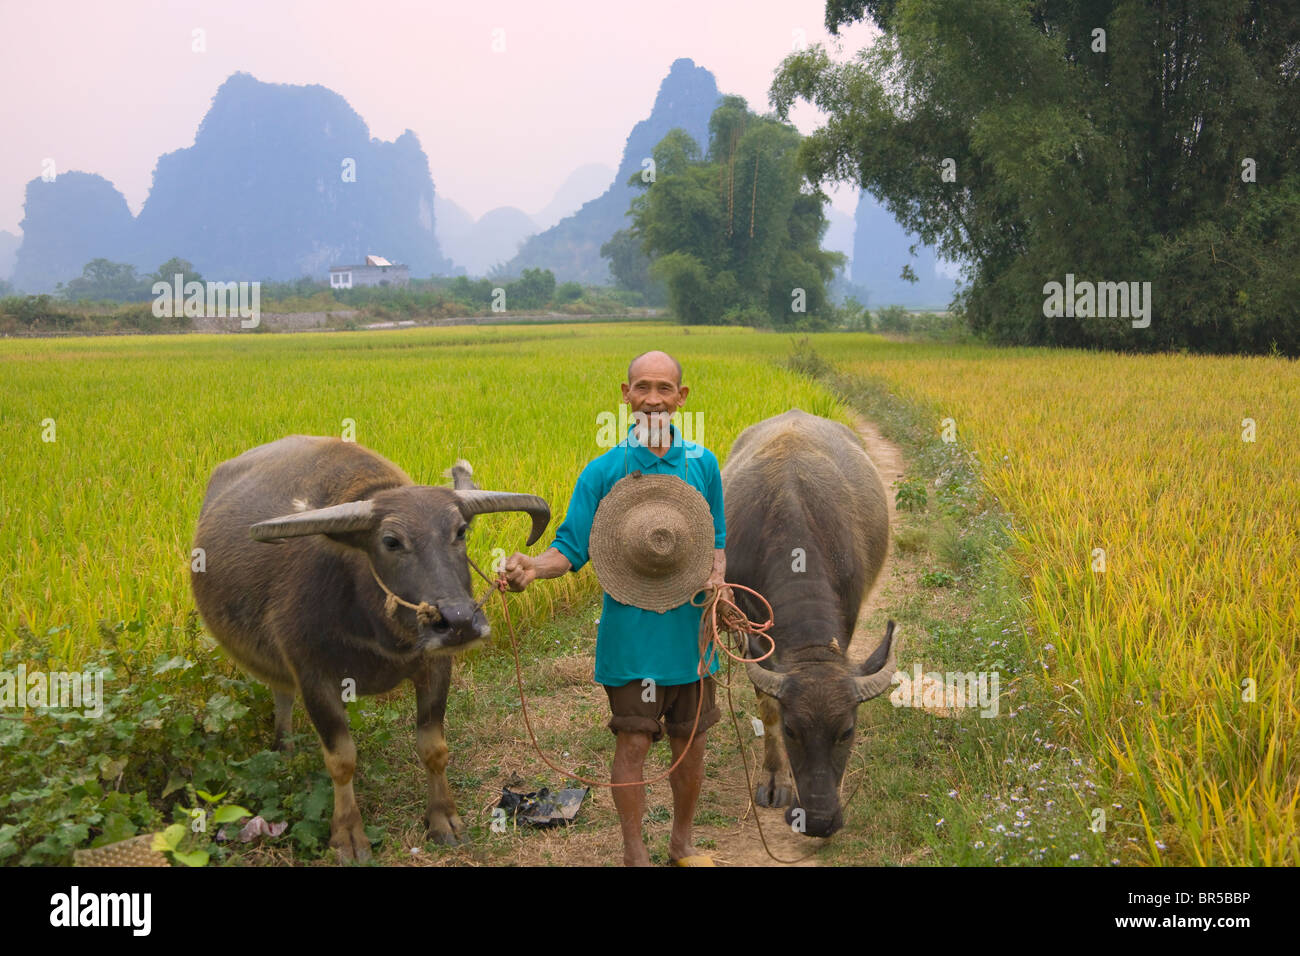 Elderly farmer with water buffaloes in the rice paddy, karst hills in the distance, Yangshuo, Guangxi, China Stock Photo